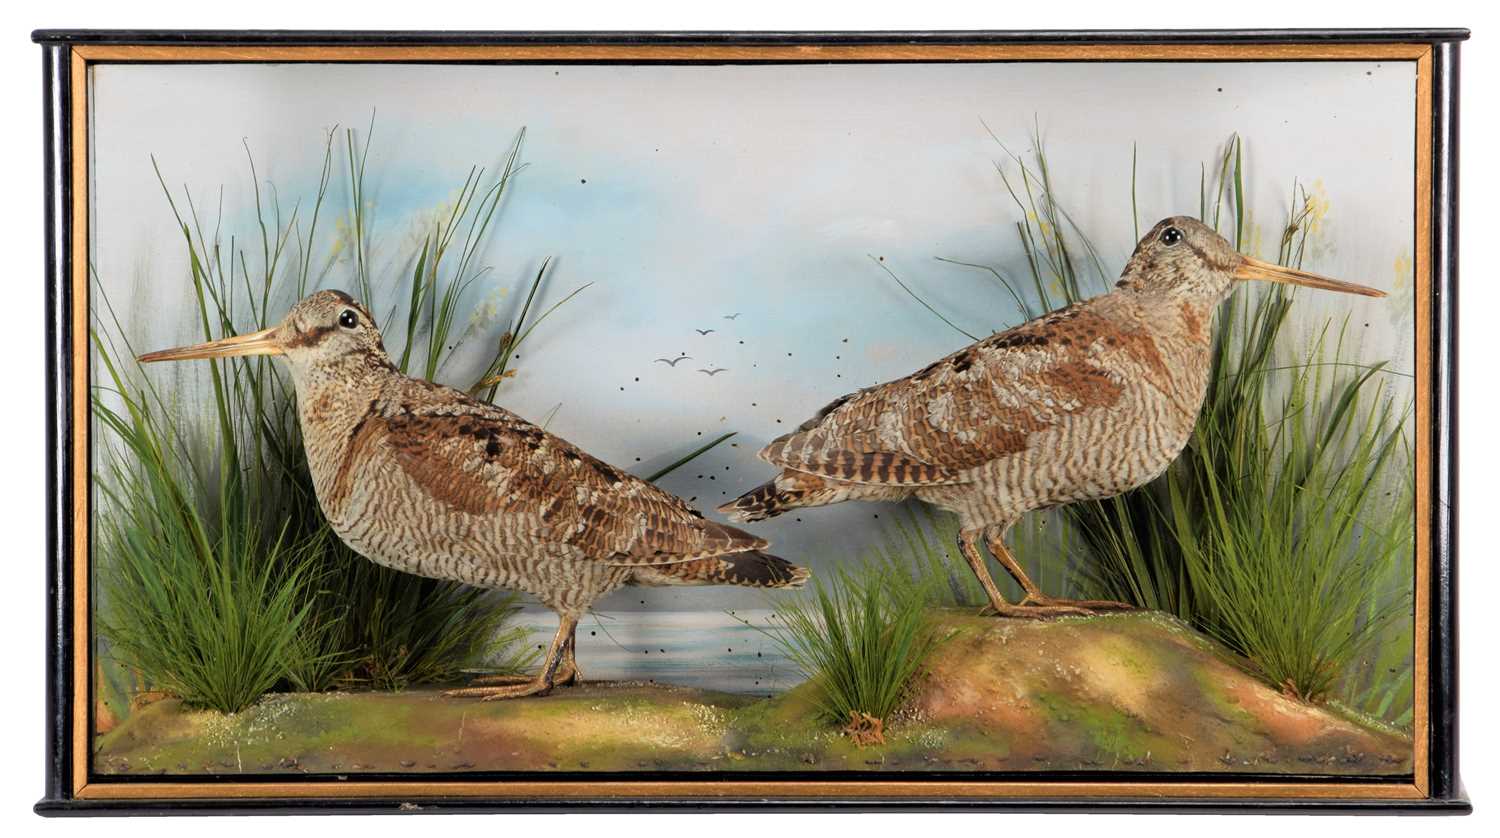 Taxidermy: A Cased Pair of Woodcocks (Scolopax rusticola), circa early 20th century, by J. Anderson,